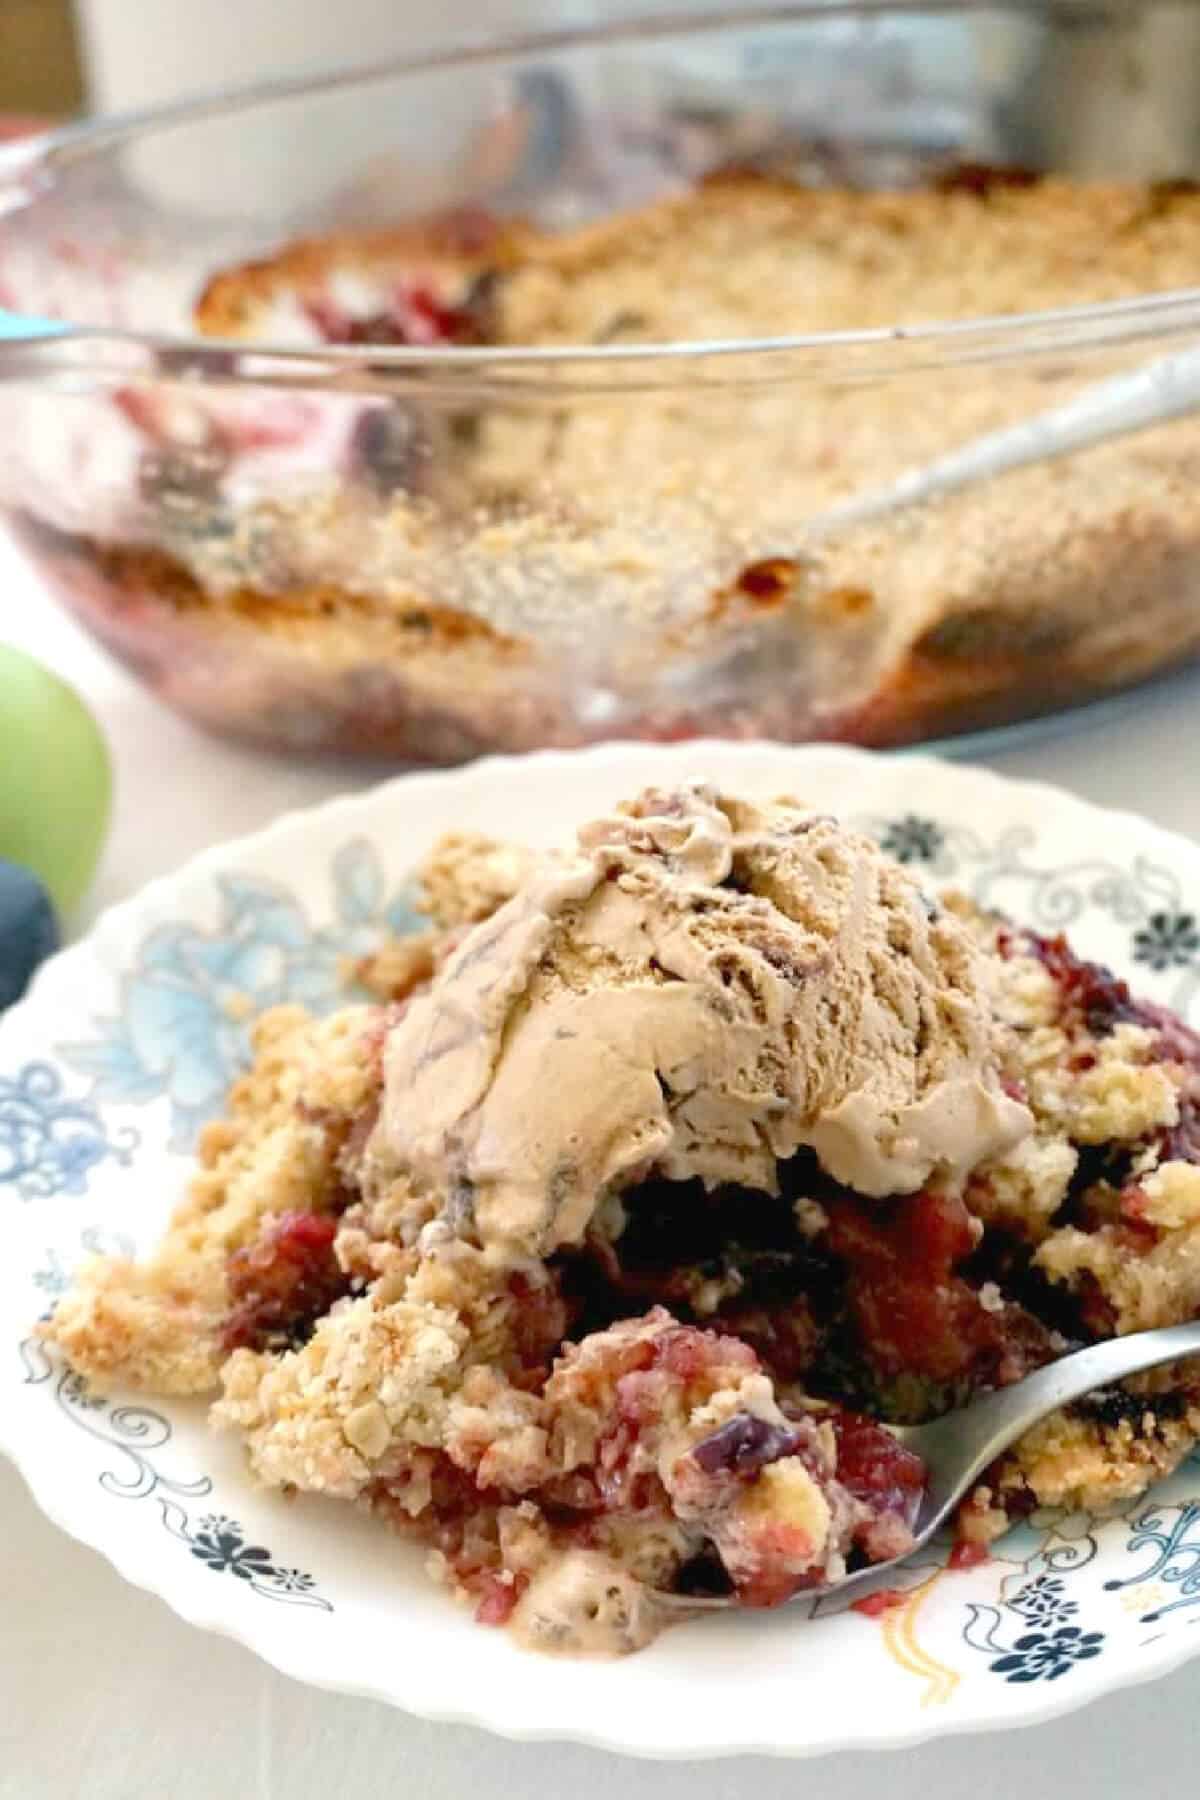 Close-up shoot of a plate with crumble and ice cream